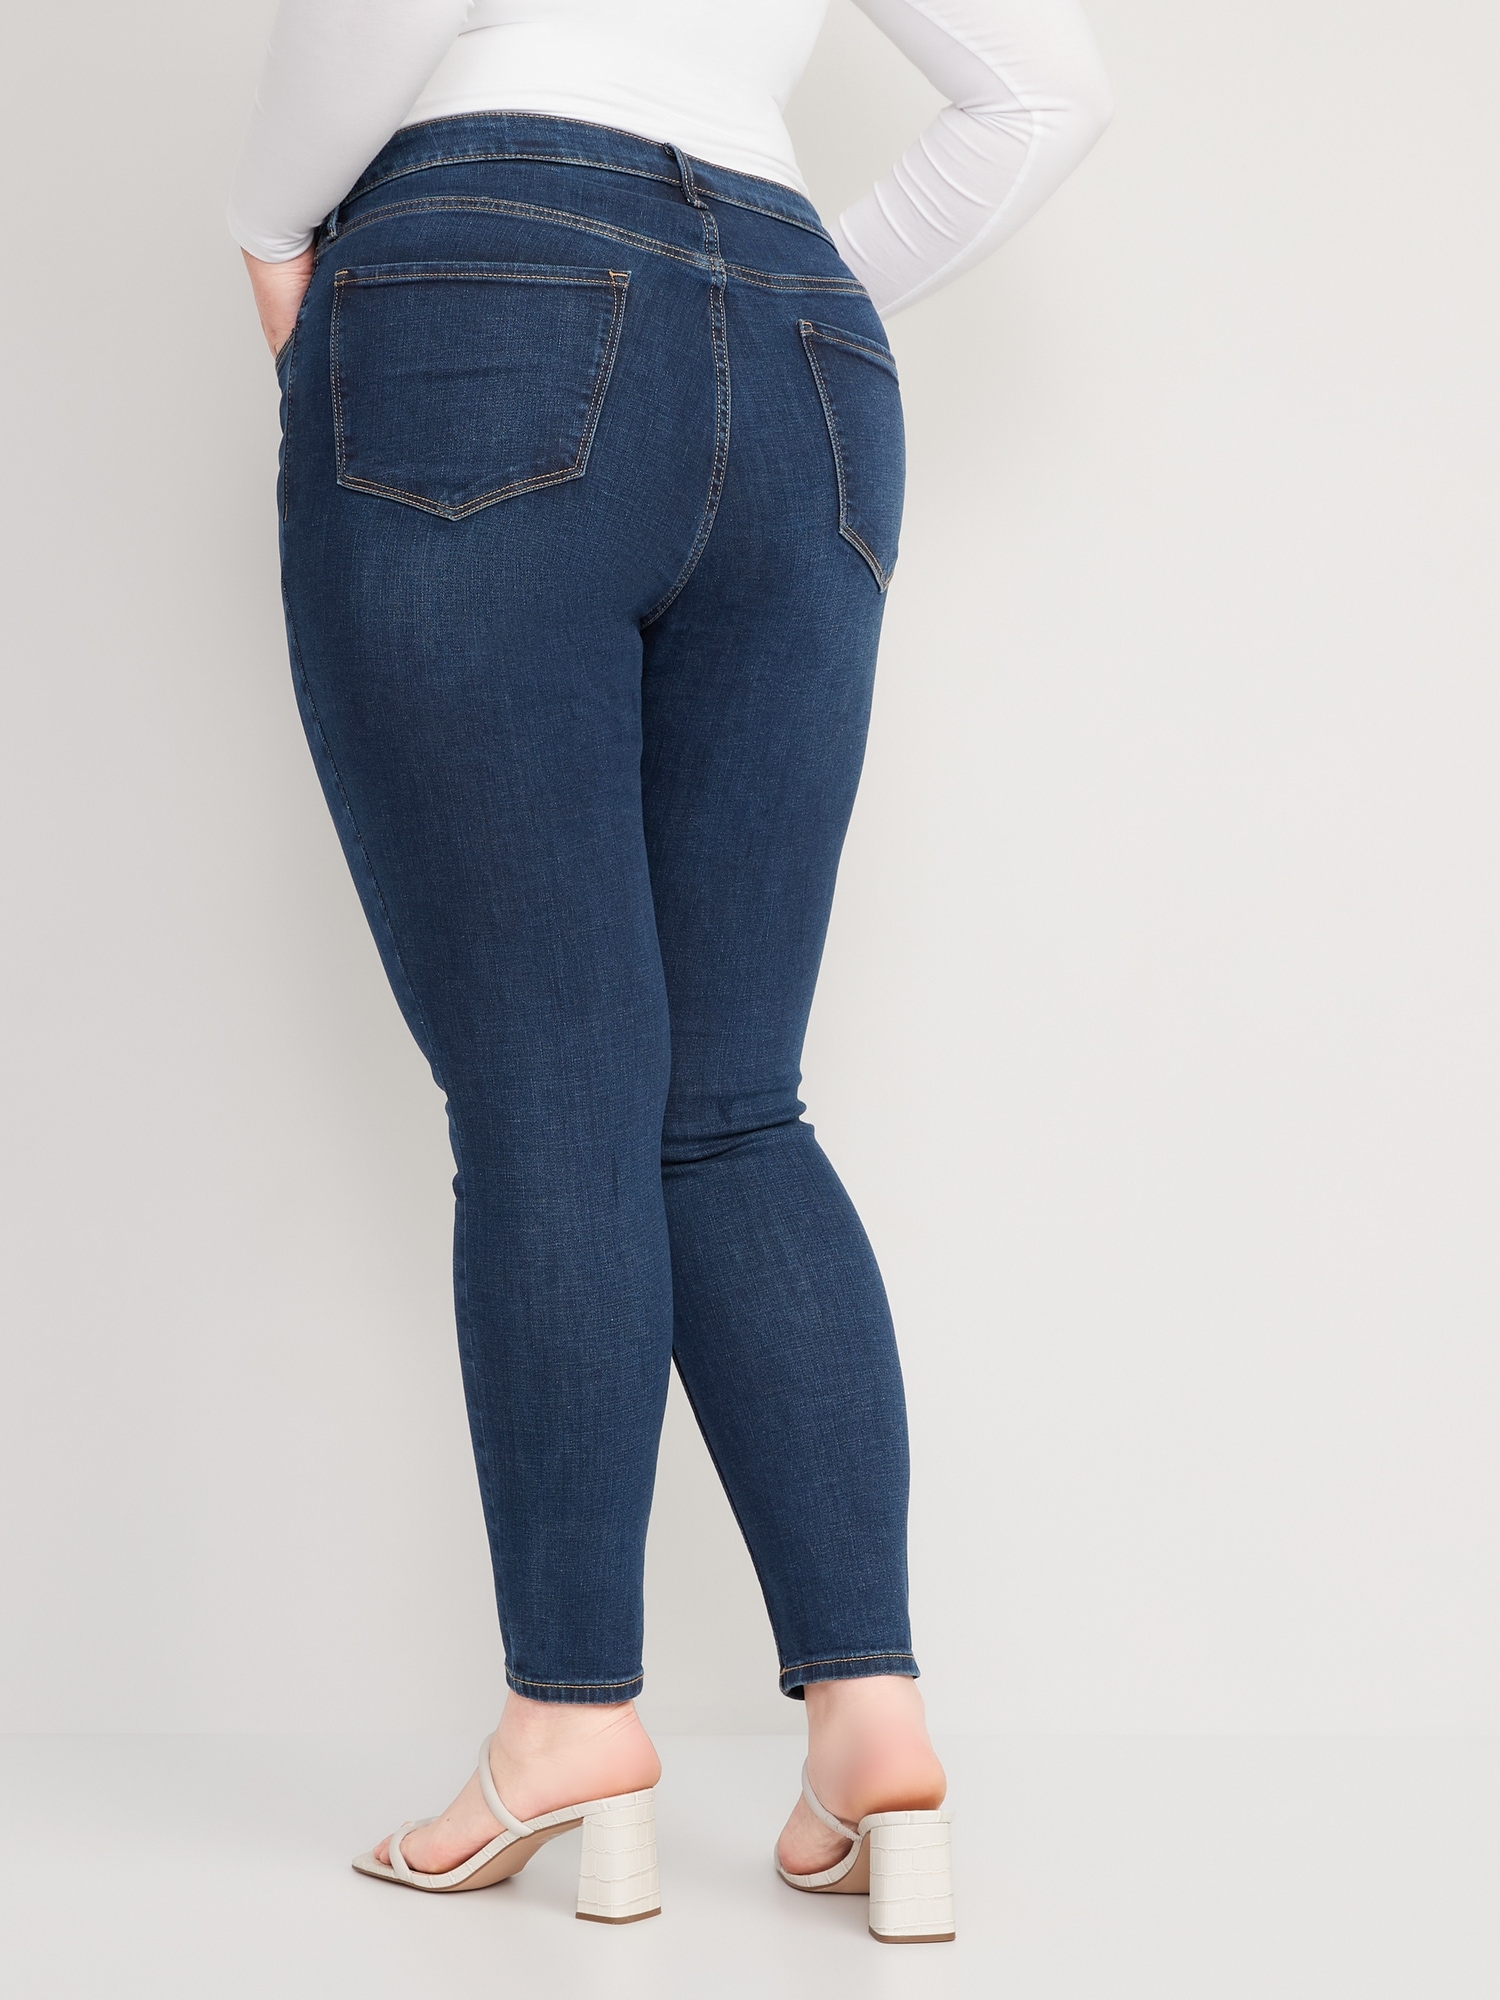 Judy Blue Jeans Plus Size McAllen High Rise Straight – American Blues